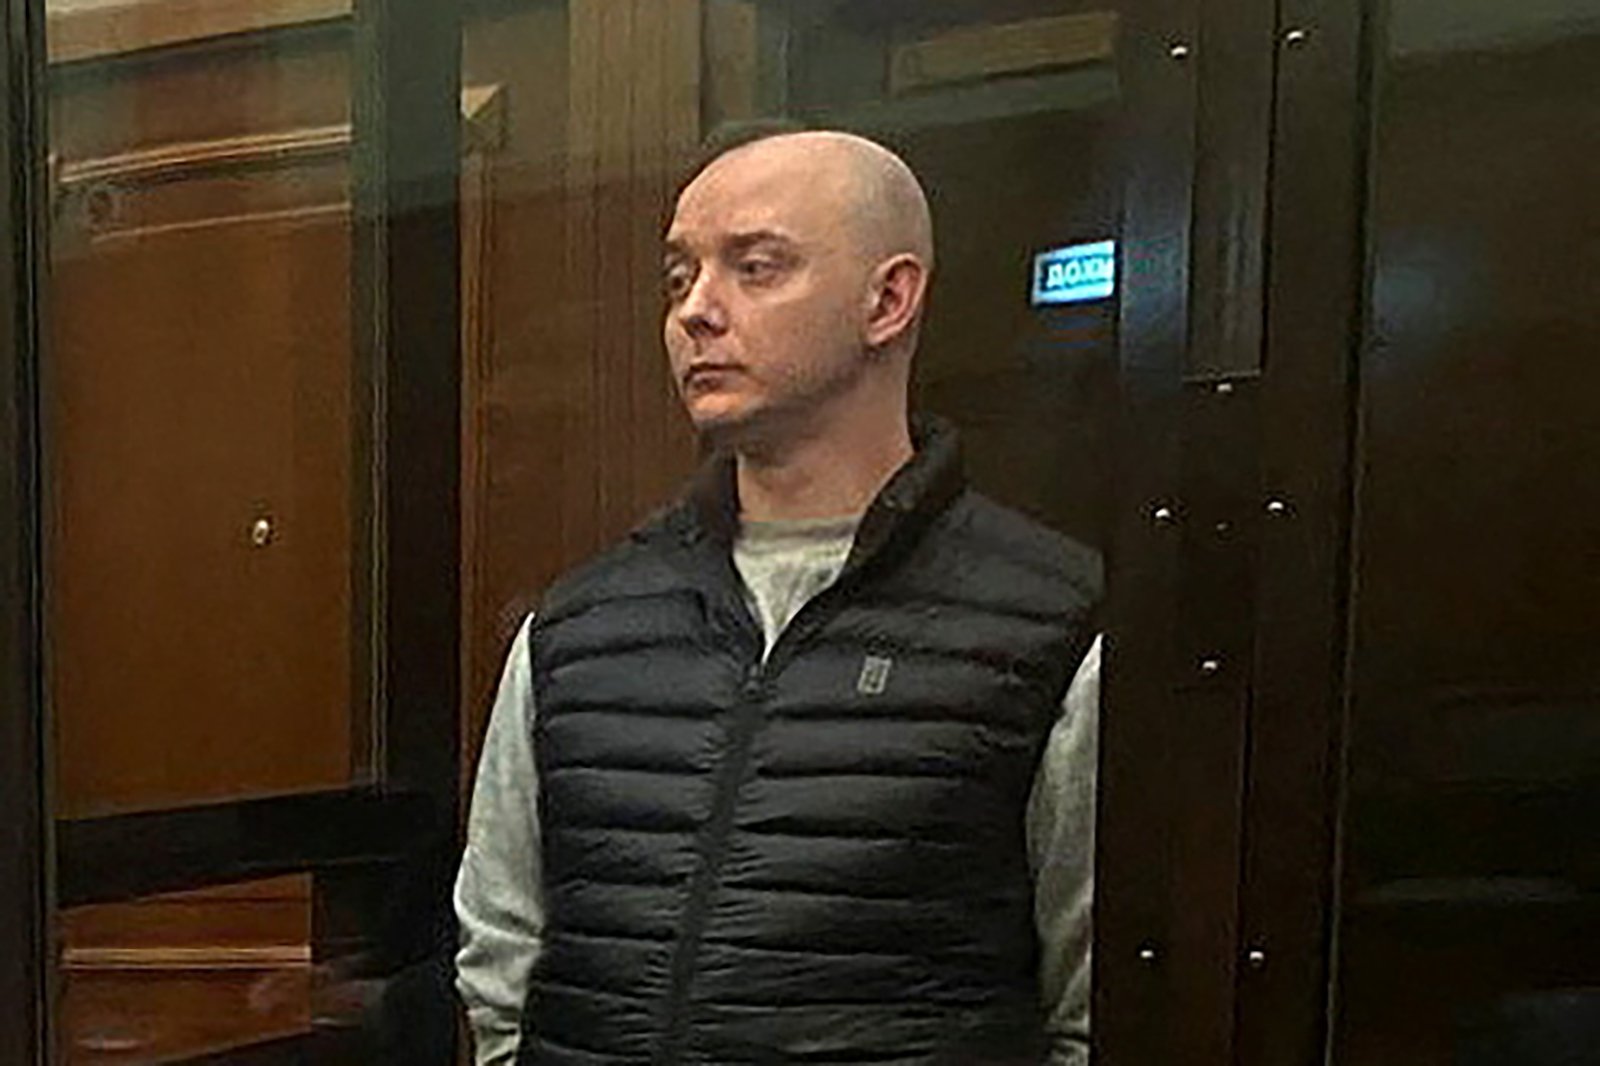 Ivan Safronov, a former journalist and adviser to the head of Russian space agency Roscosmos accused of state treason, stands inside a defendants' cage as he attends a court hearing in Moscow, Russia September 5.